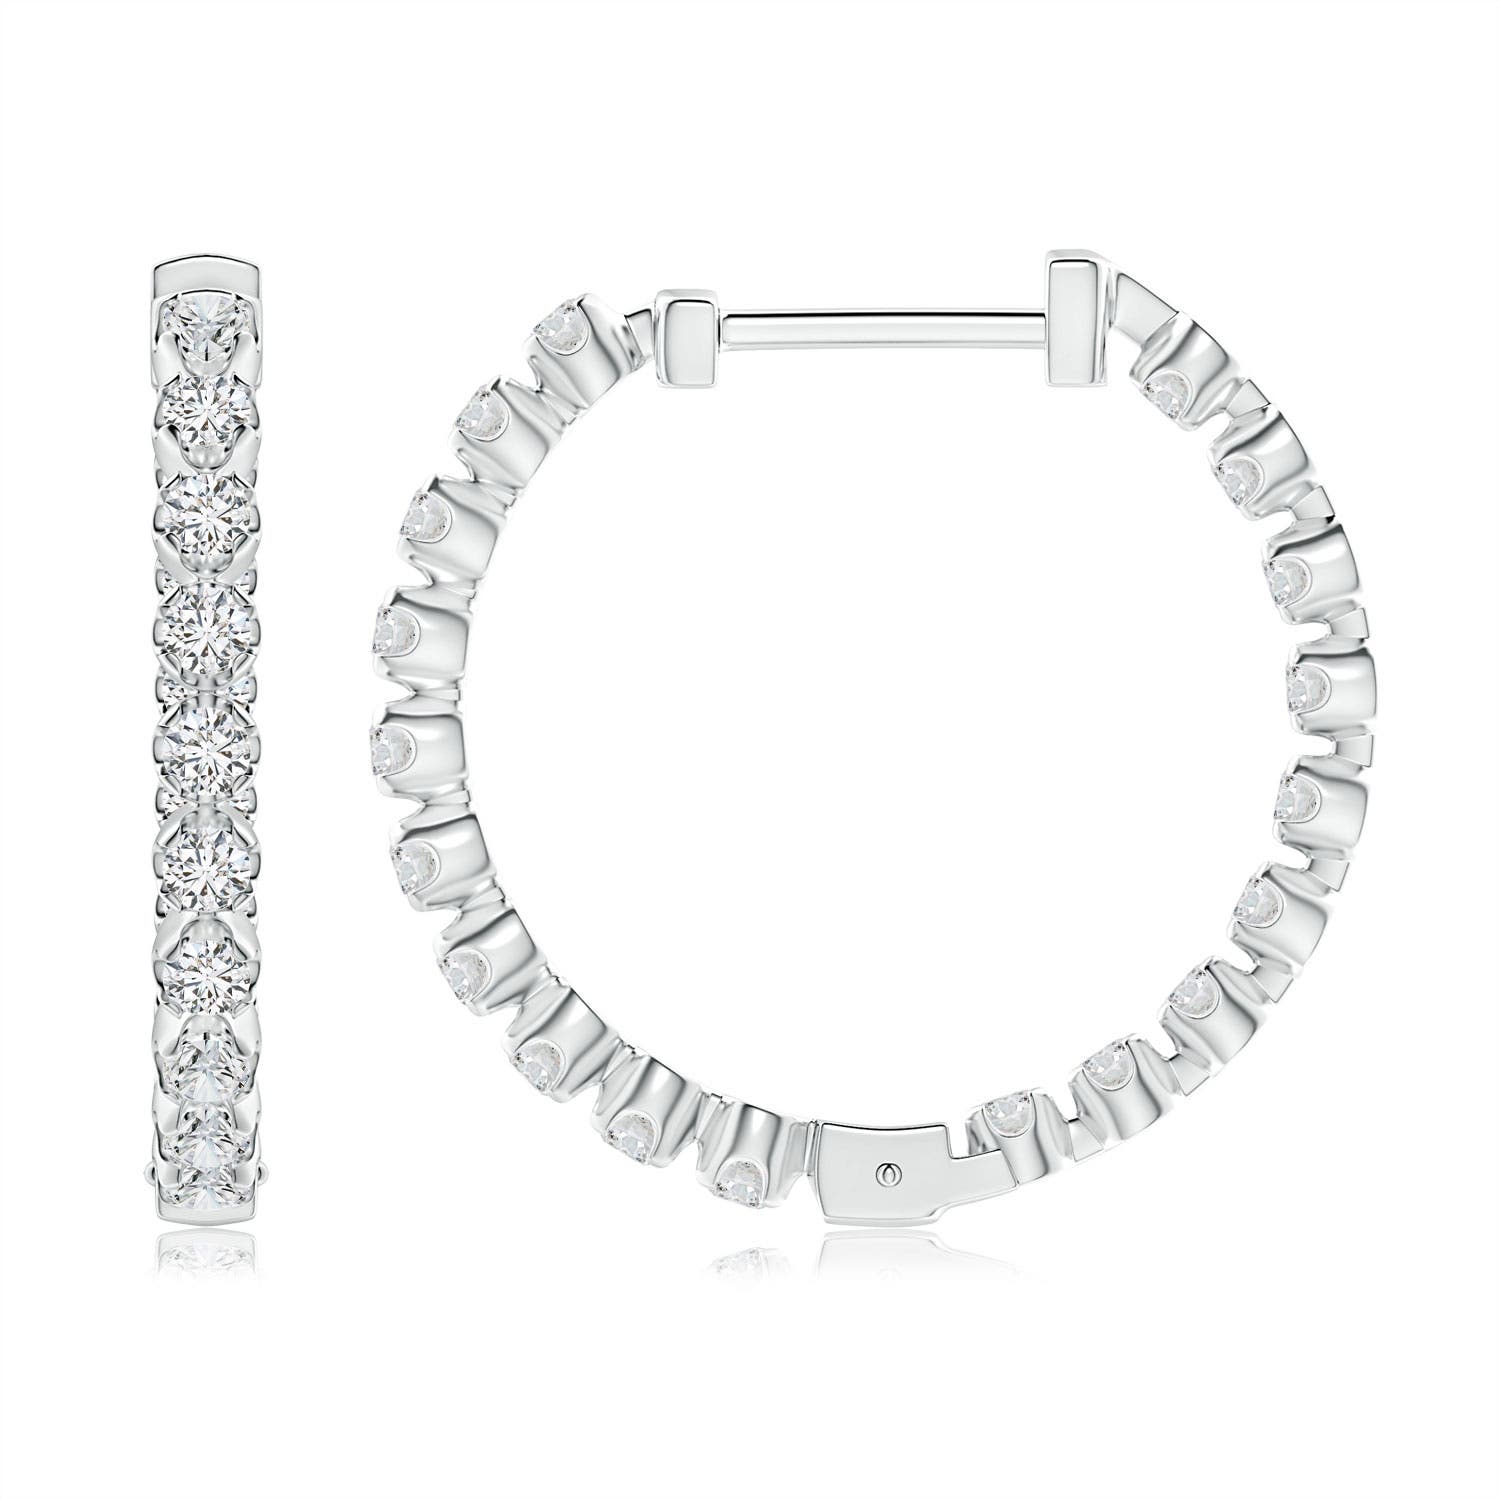 H, SI2 / 0.95 CT / 14 KT White Gold